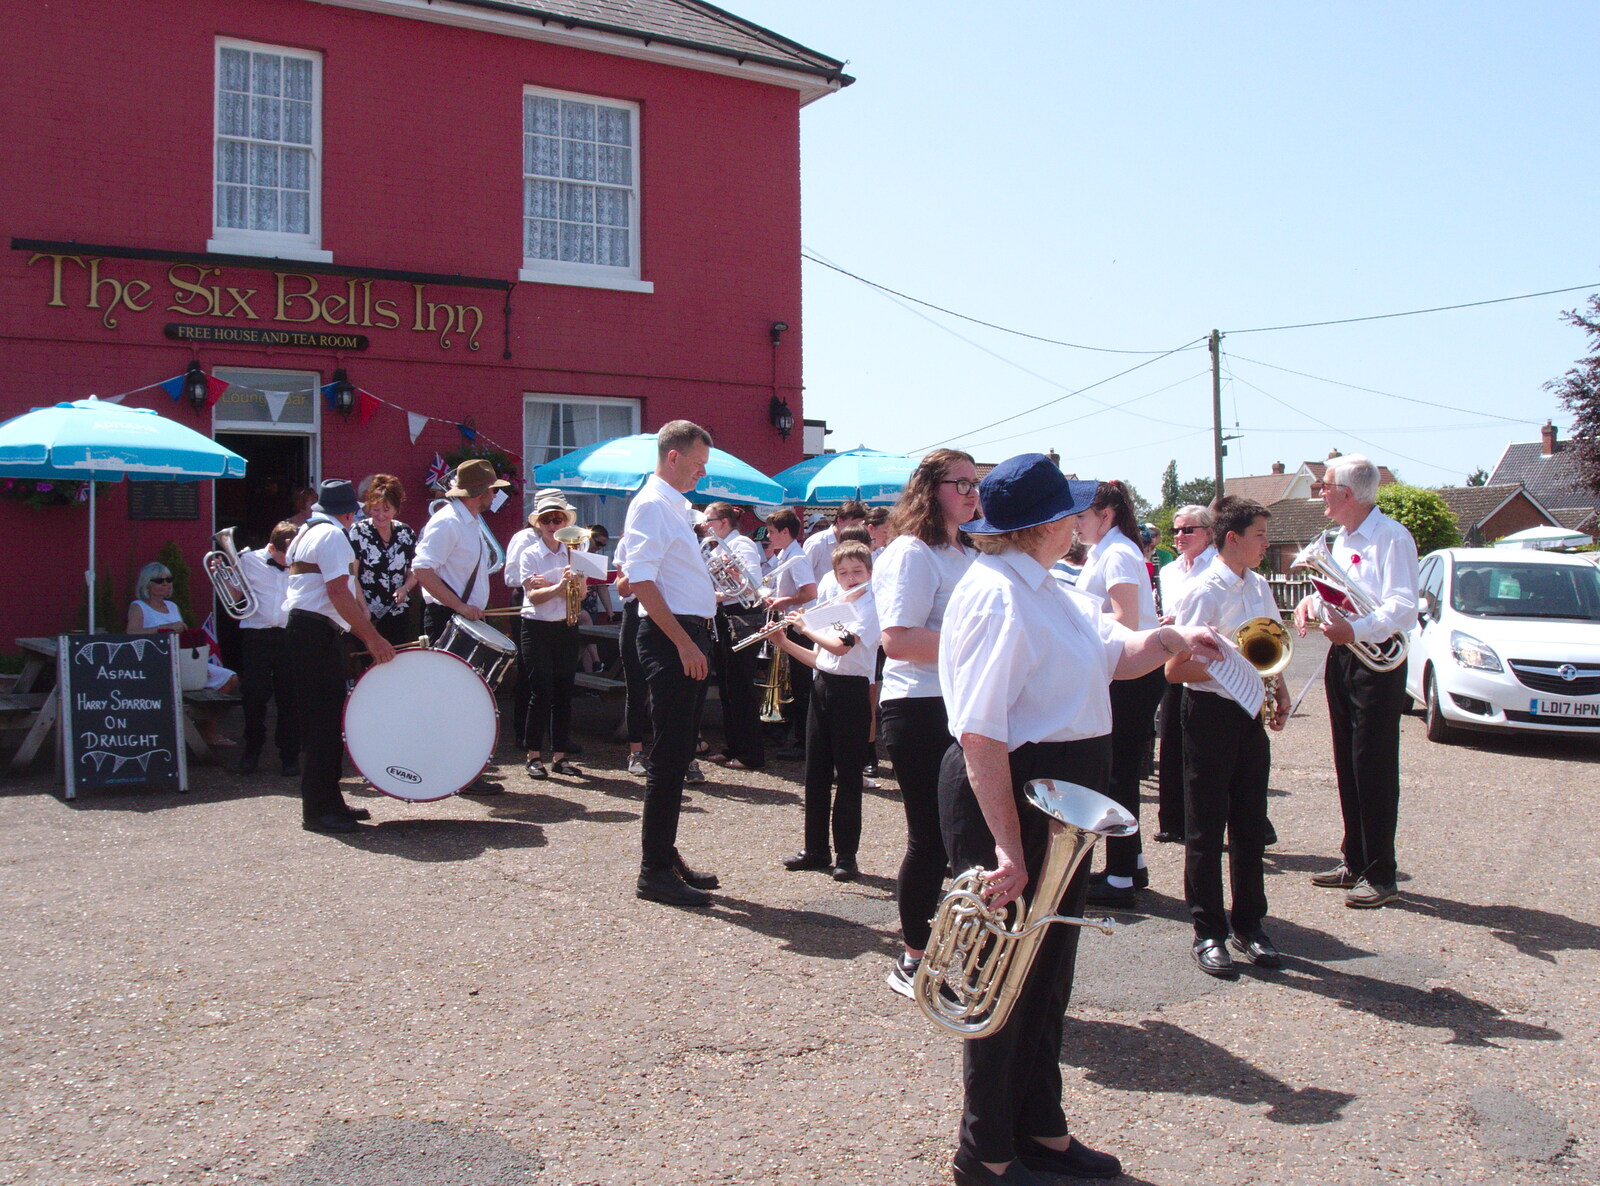 The band forms up from GSB and the Gislingham Fete, Suffolk - 29th June 2019